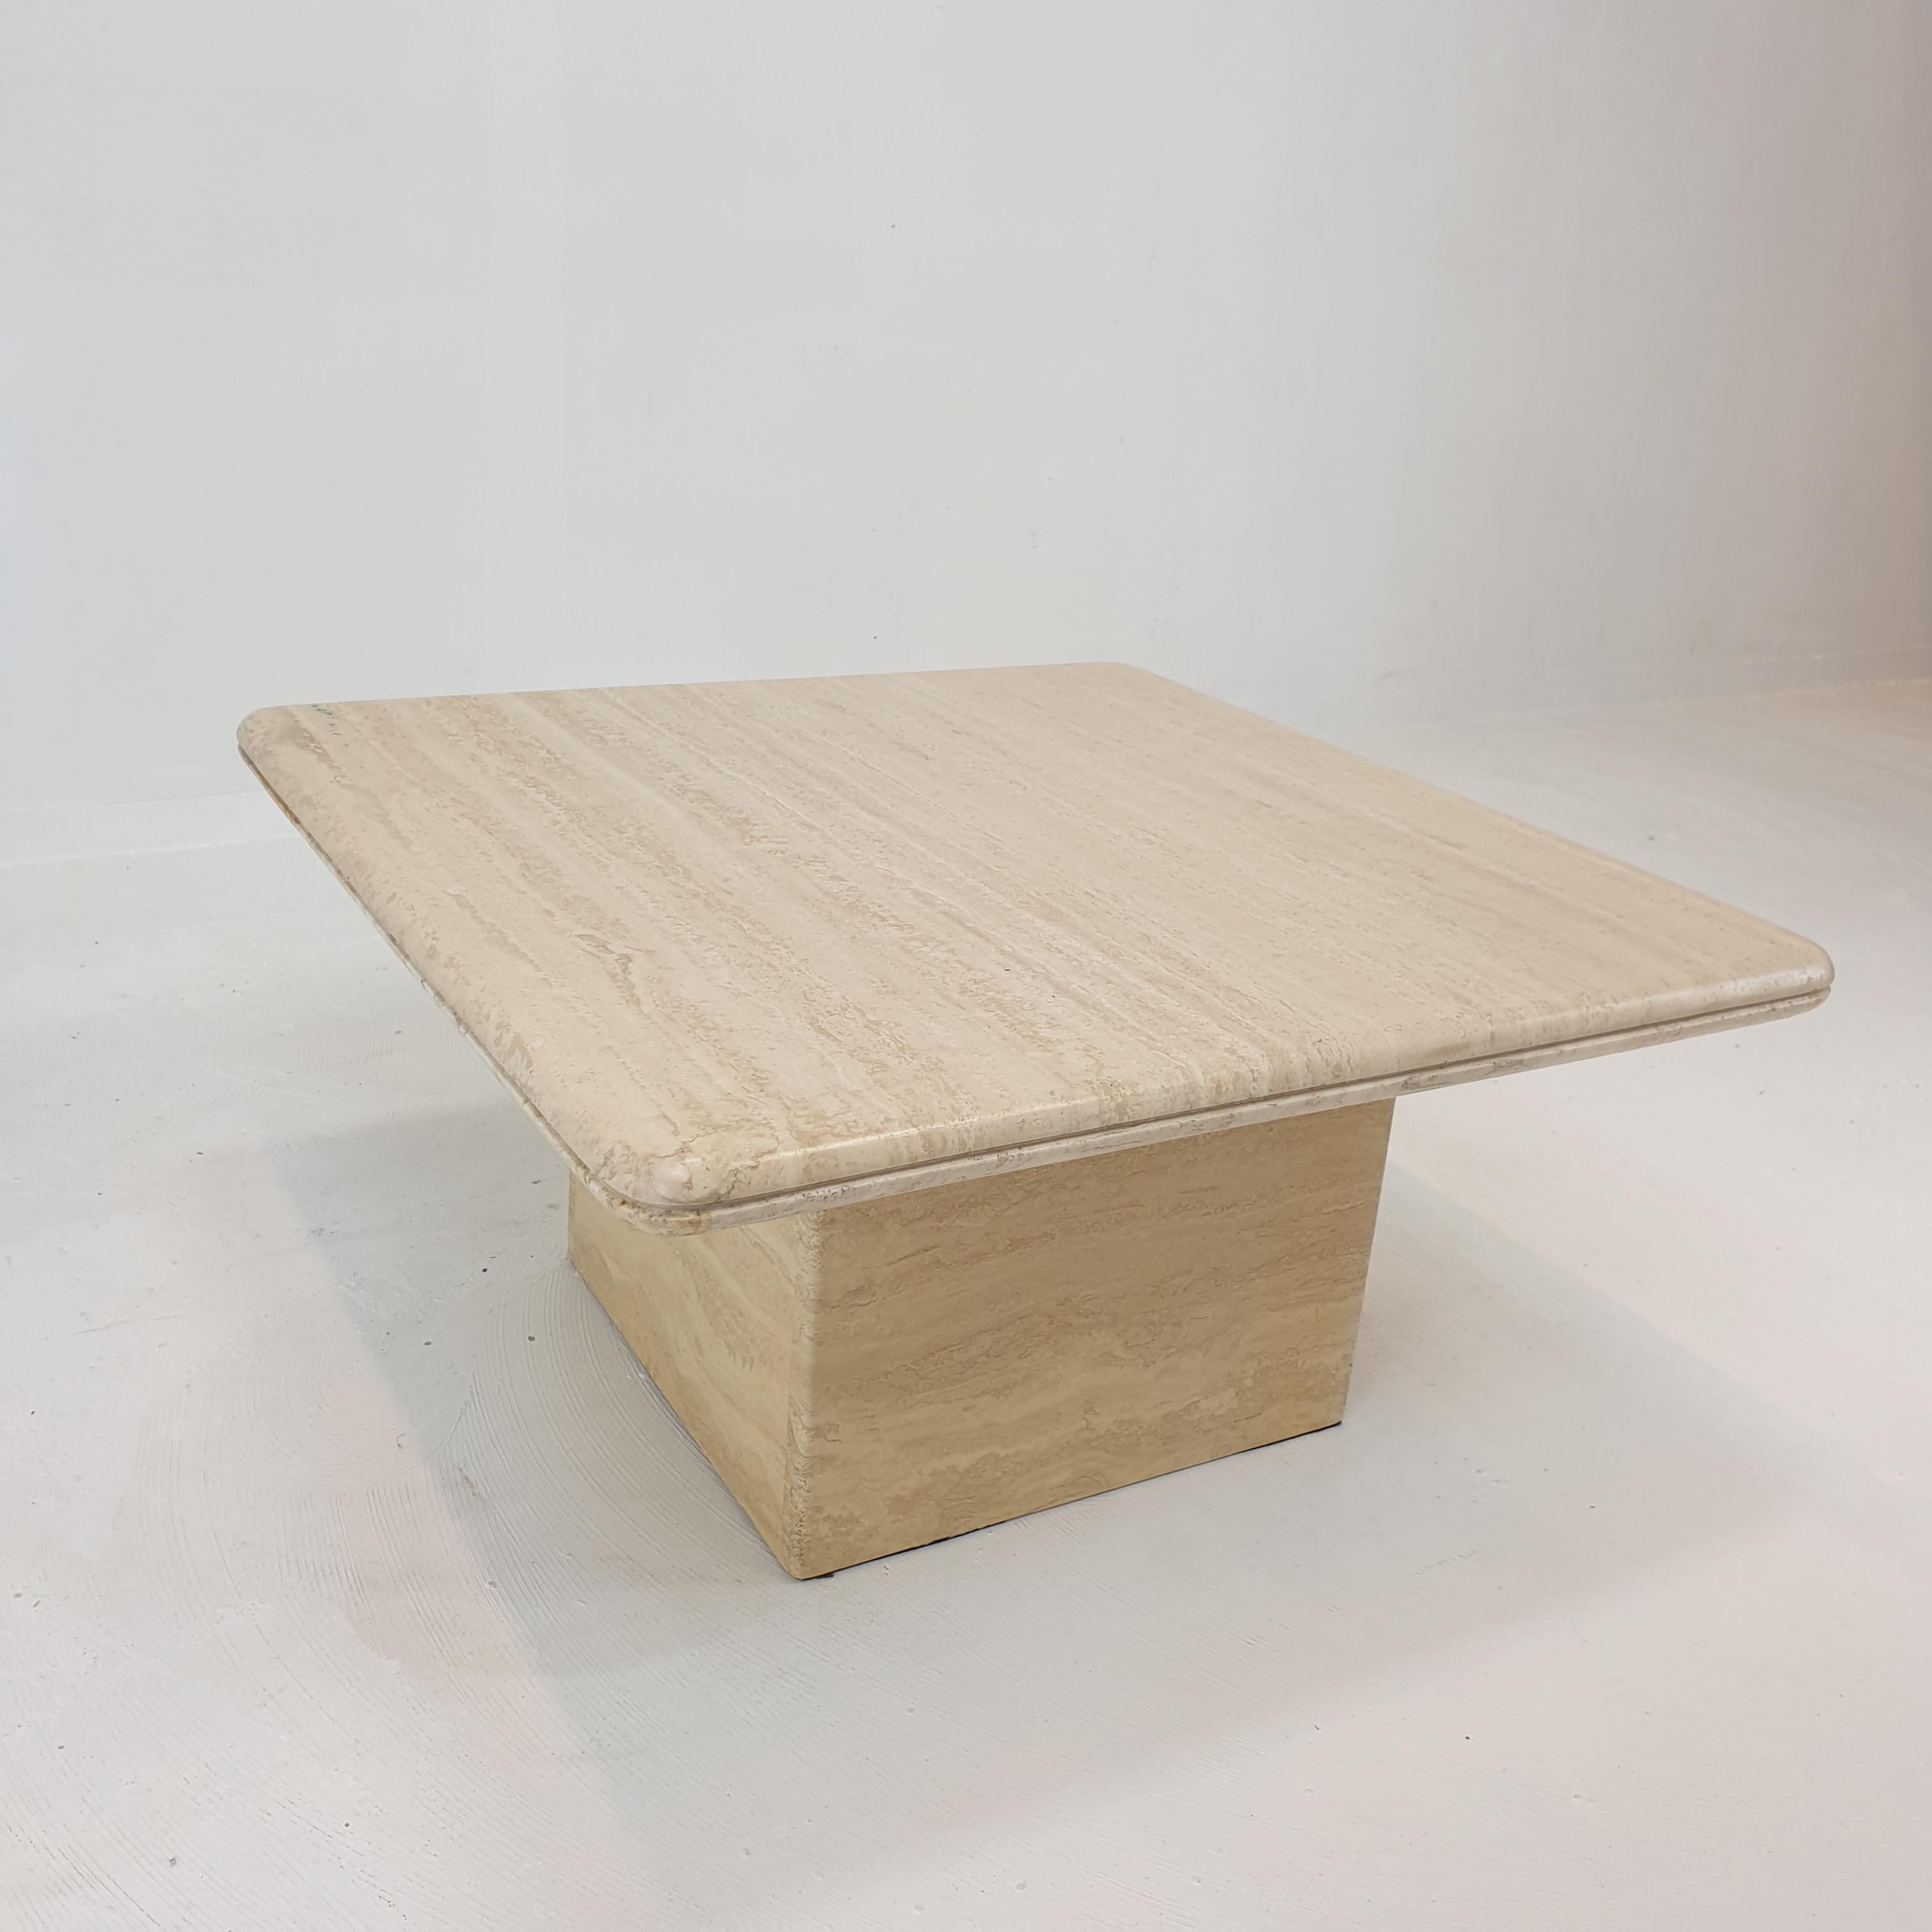 Hand-Crafted Italian Travertine Coffee Table, 1980s For Sale